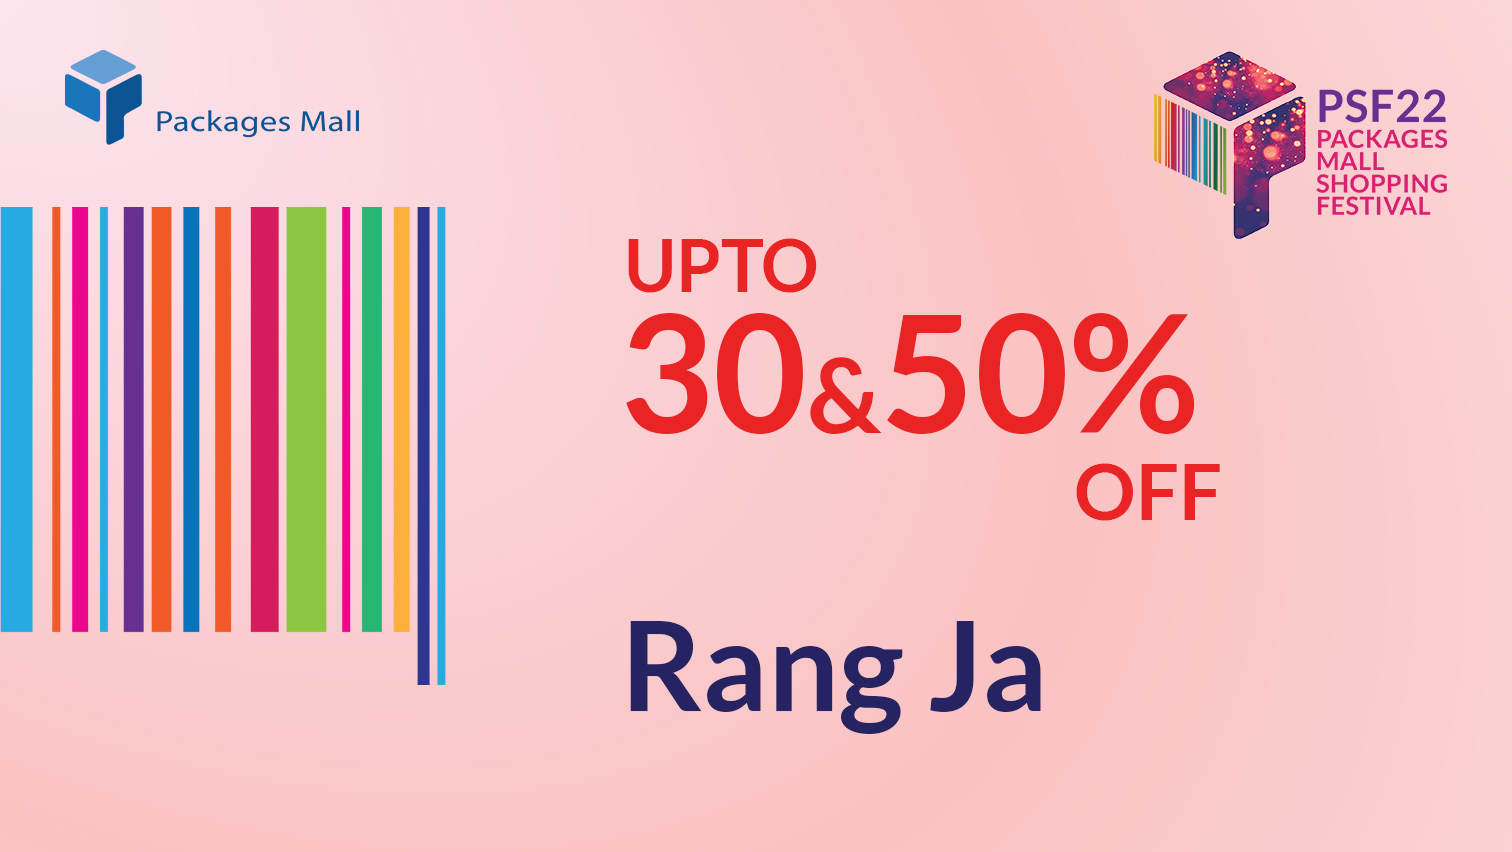 rang ja packages mall